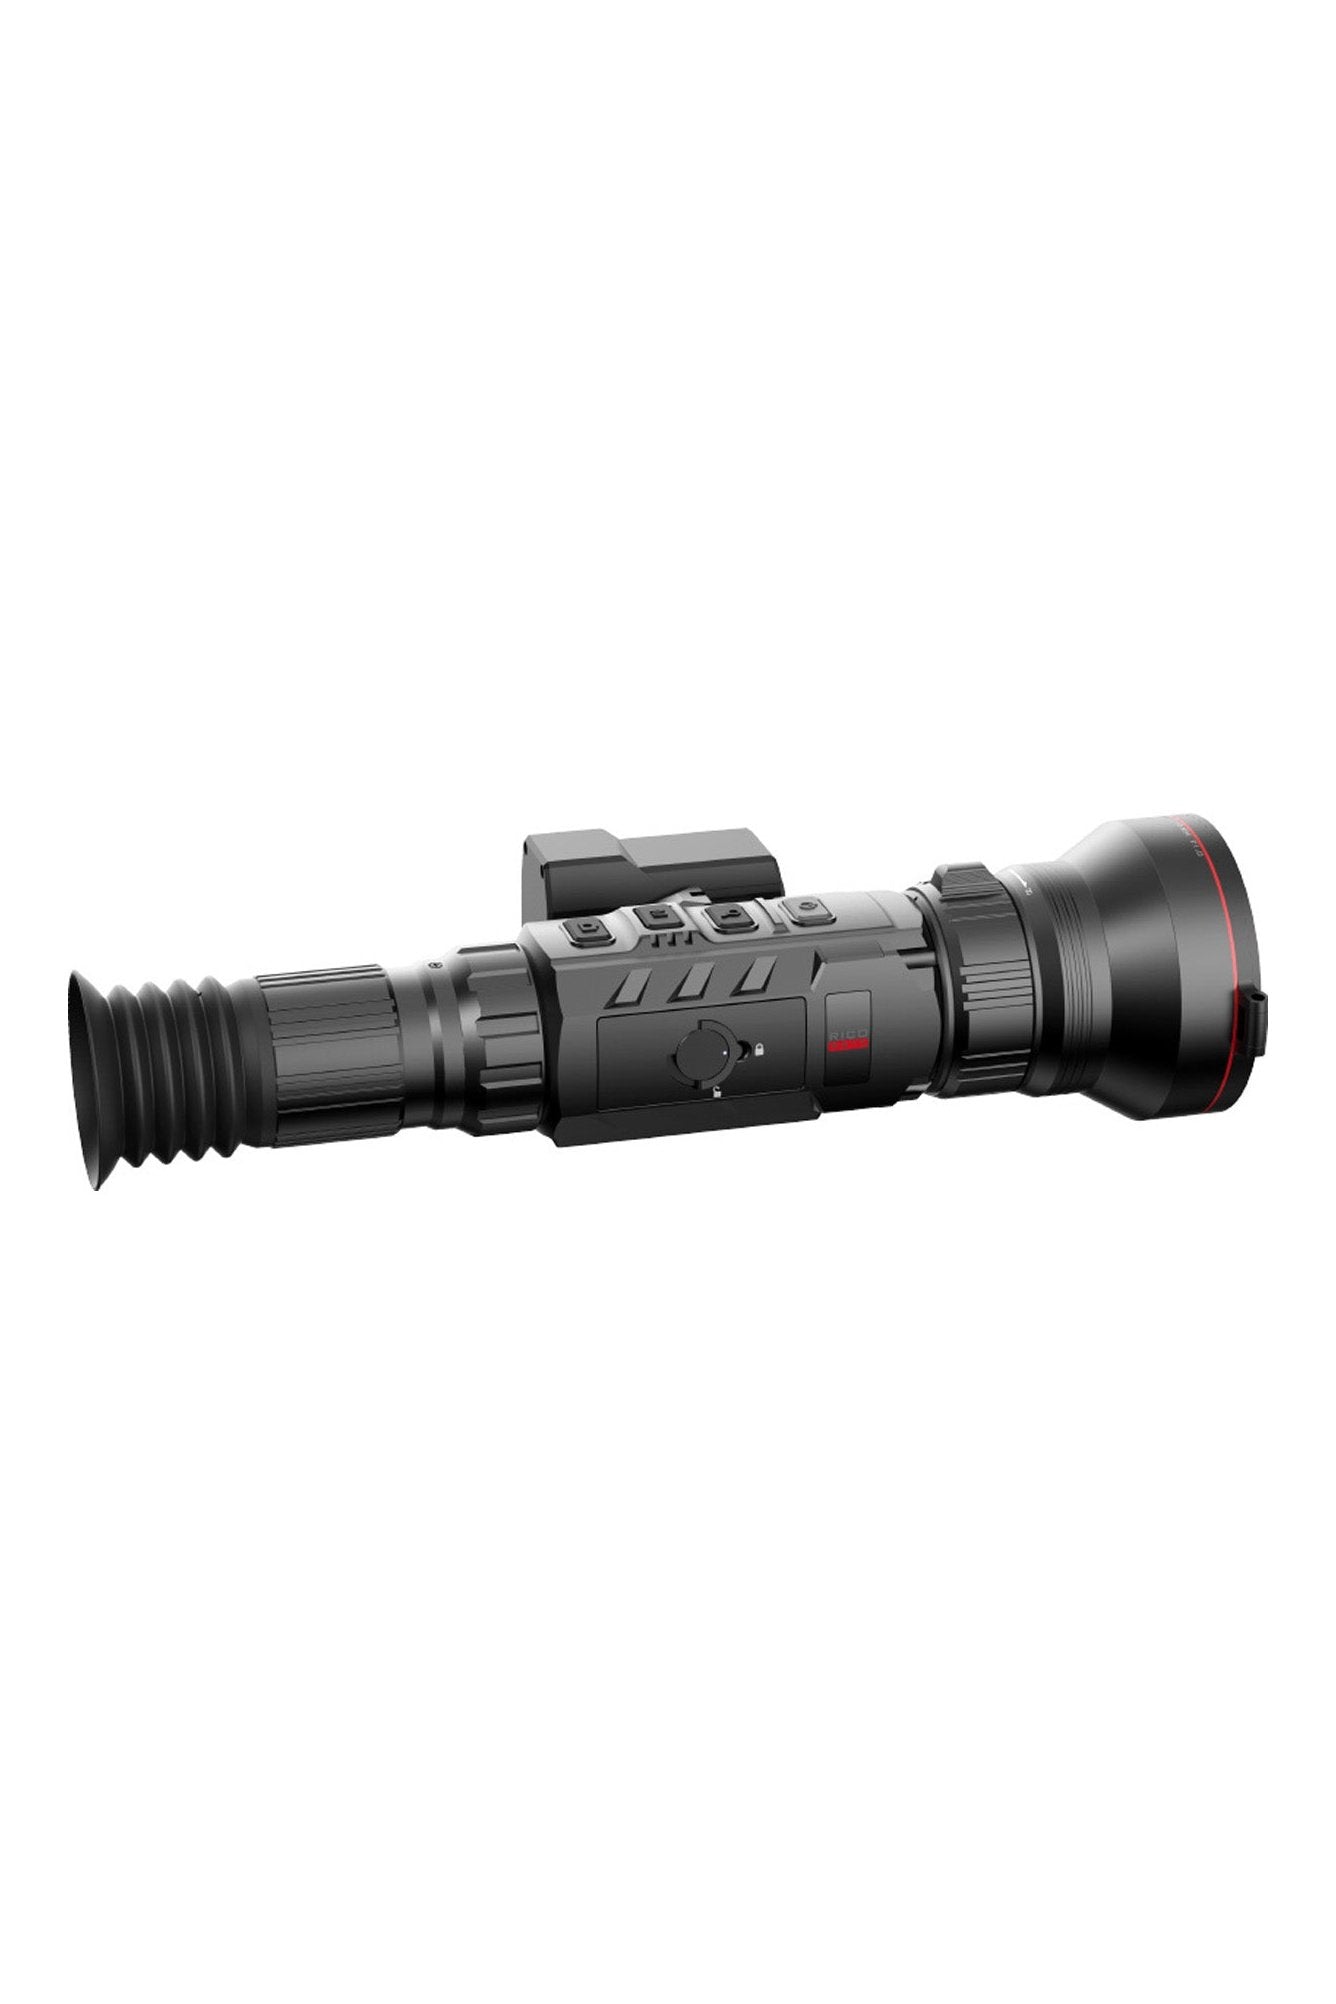 Infiray Rico RS75 Thermal Scope